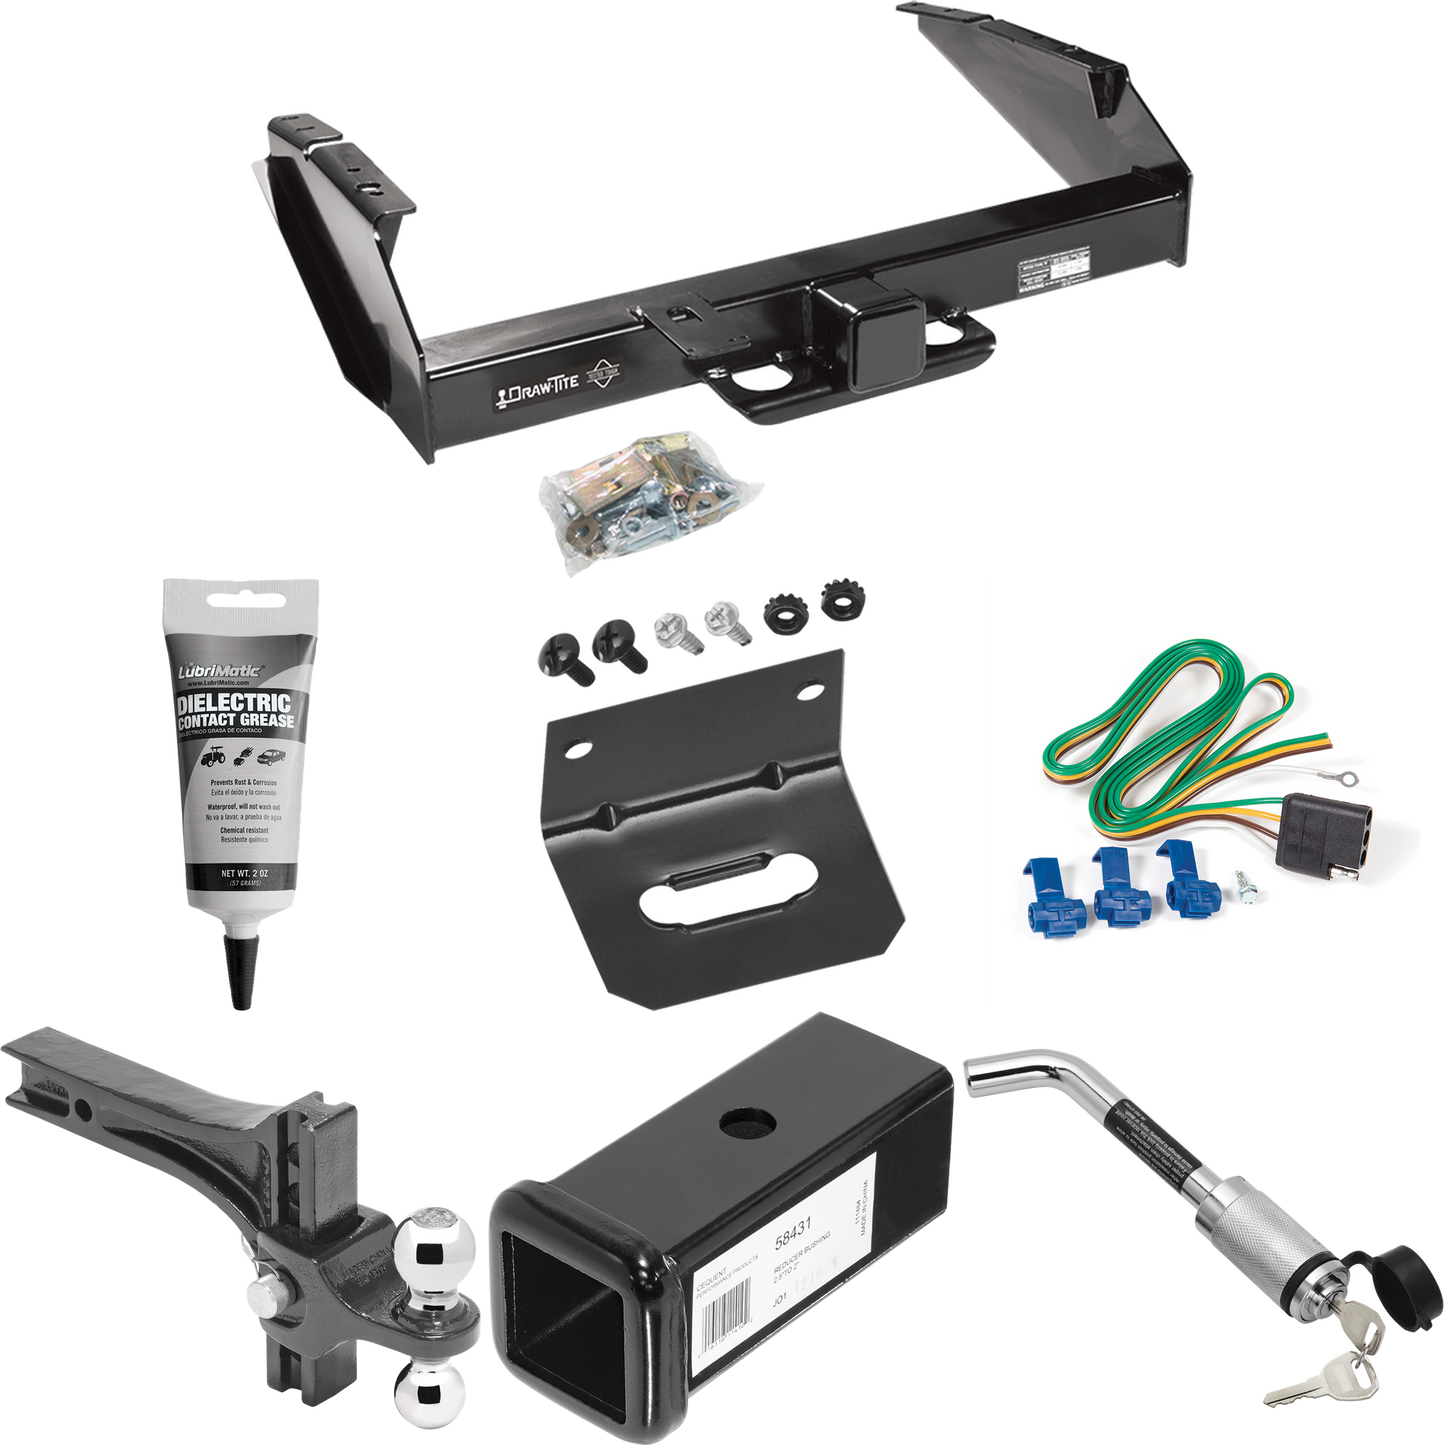 Fits 1980-1986 Ford F-250 Trailer Hitch Tow PKG w/ 4-Flat Wiring Harness + 2-1/2" to 2" Adapter 7" Length + Adjustable Drop Rise Dual Ball Ball Mount 2" & 2-5/16" Trailer Balls + Hitch Lock + Wiring Bracket + Electric Grease (Excludes: w/Custom Fasci